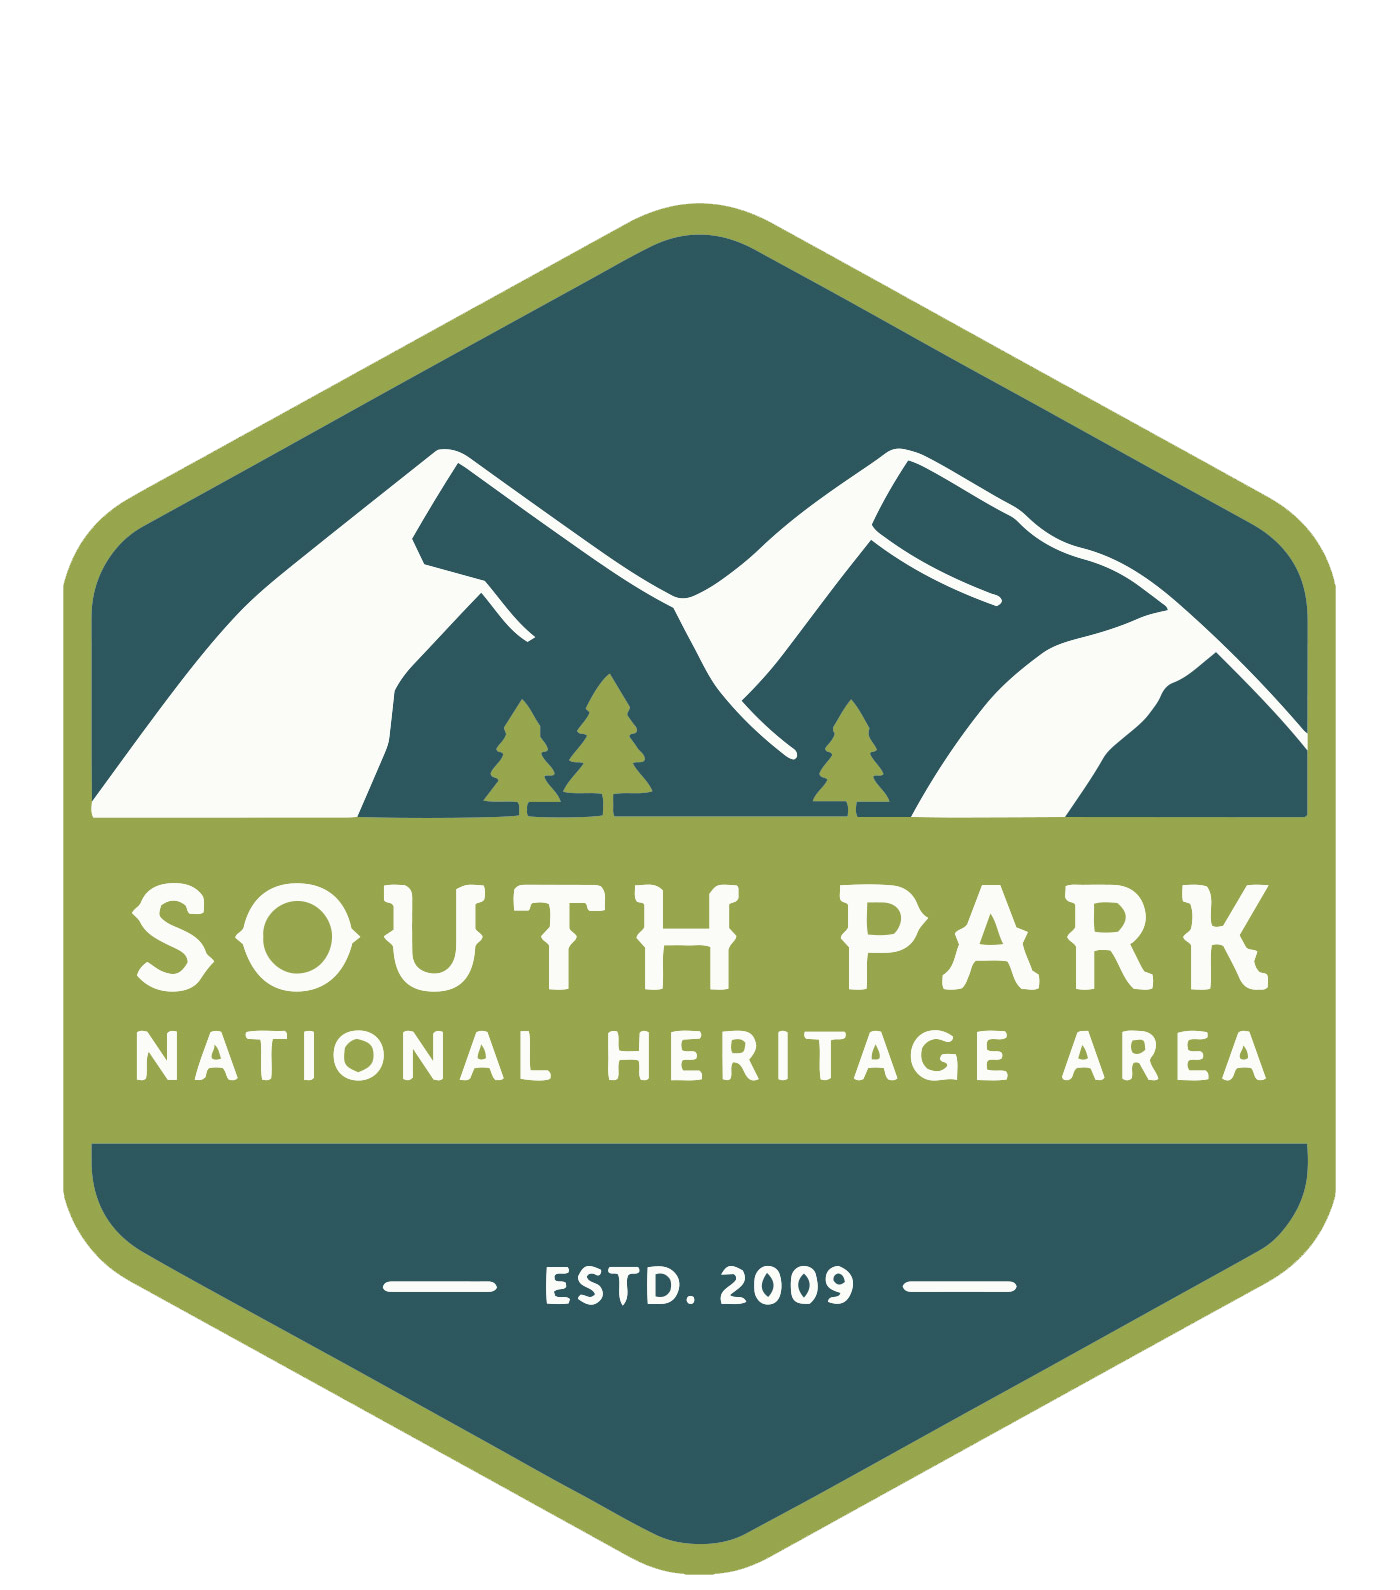 South Park National Heritage Area